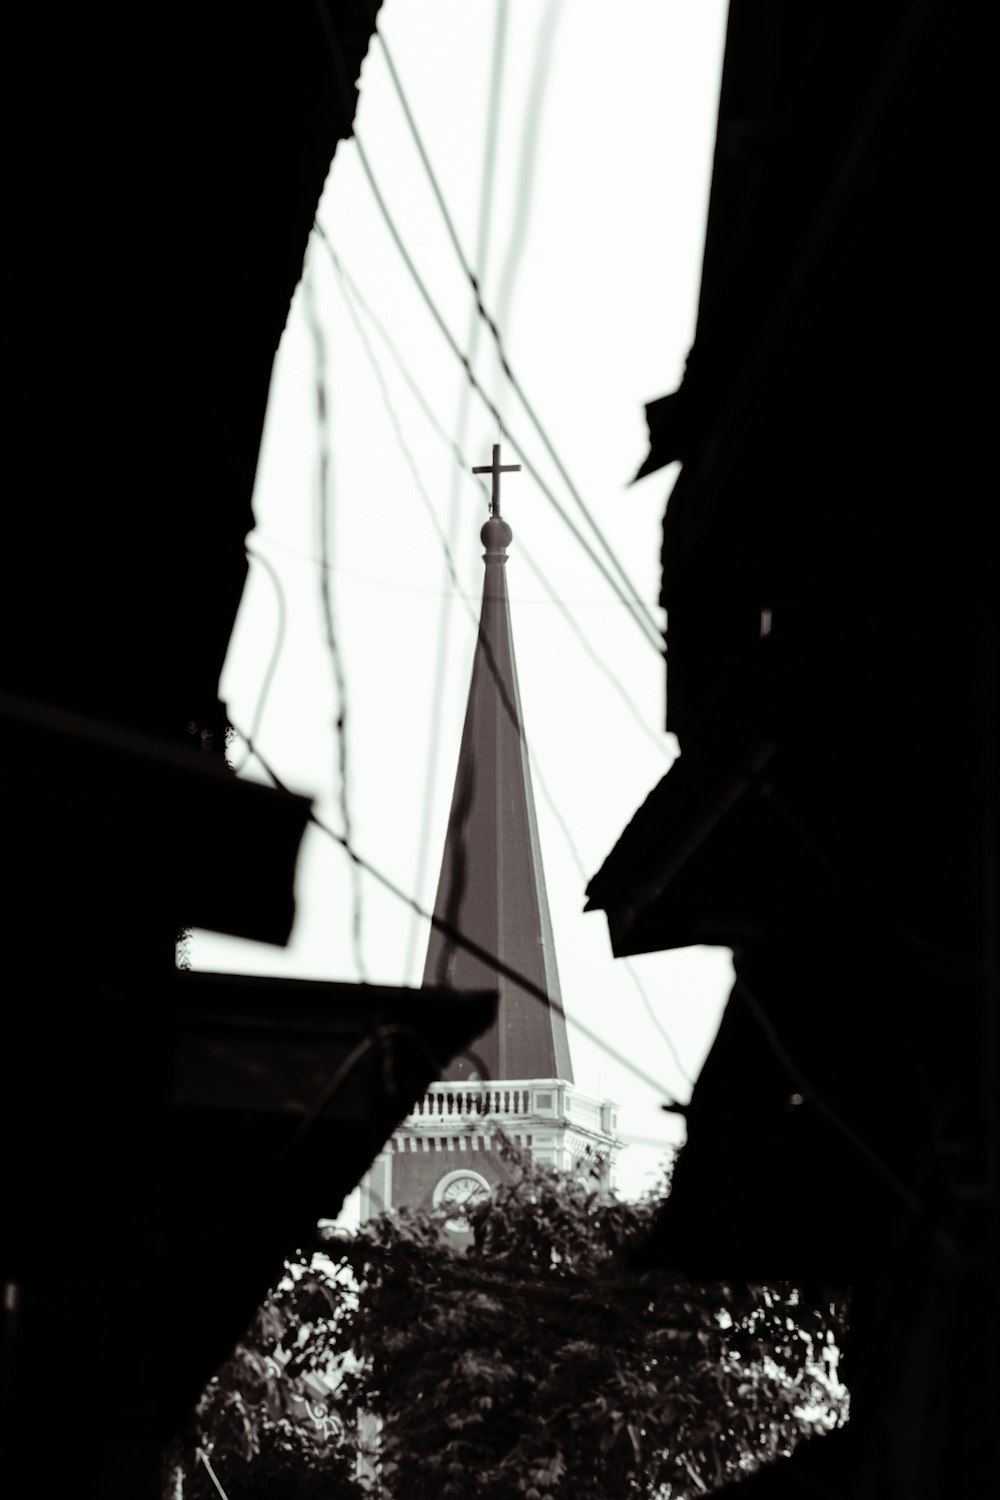 a church steeple with a cross on top